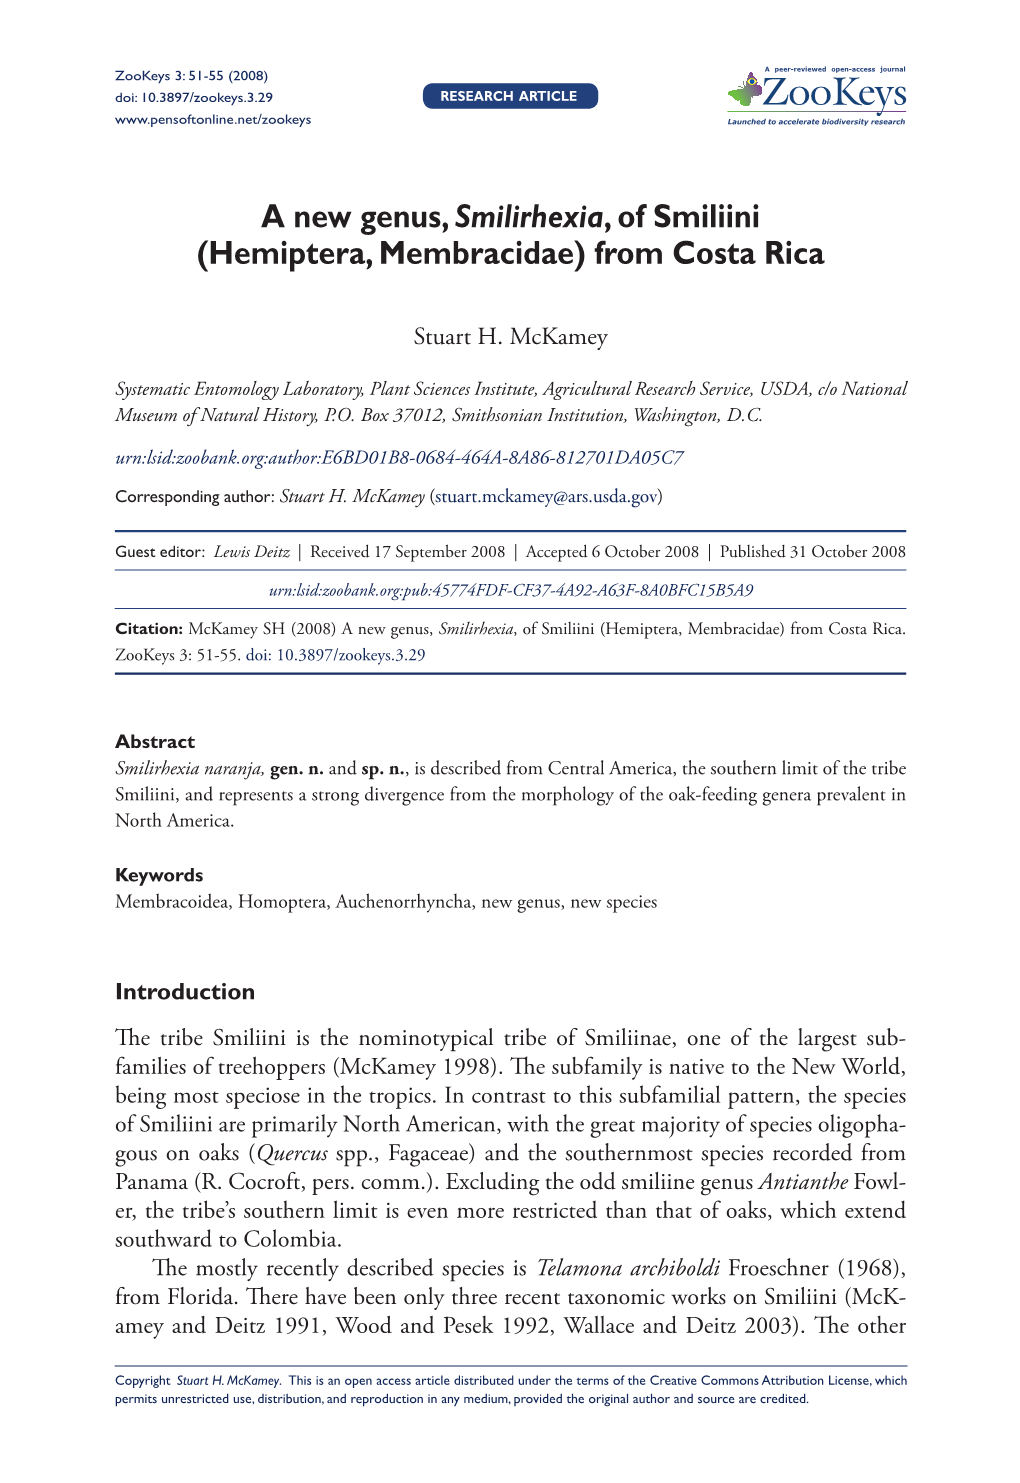 Hemiptera, Membracidae) from Costa Rica 51 Doi: 10.3897/Zookeys.3.29 RESEARCH ARTICLE Launched to Accelerate Biodiversity Research